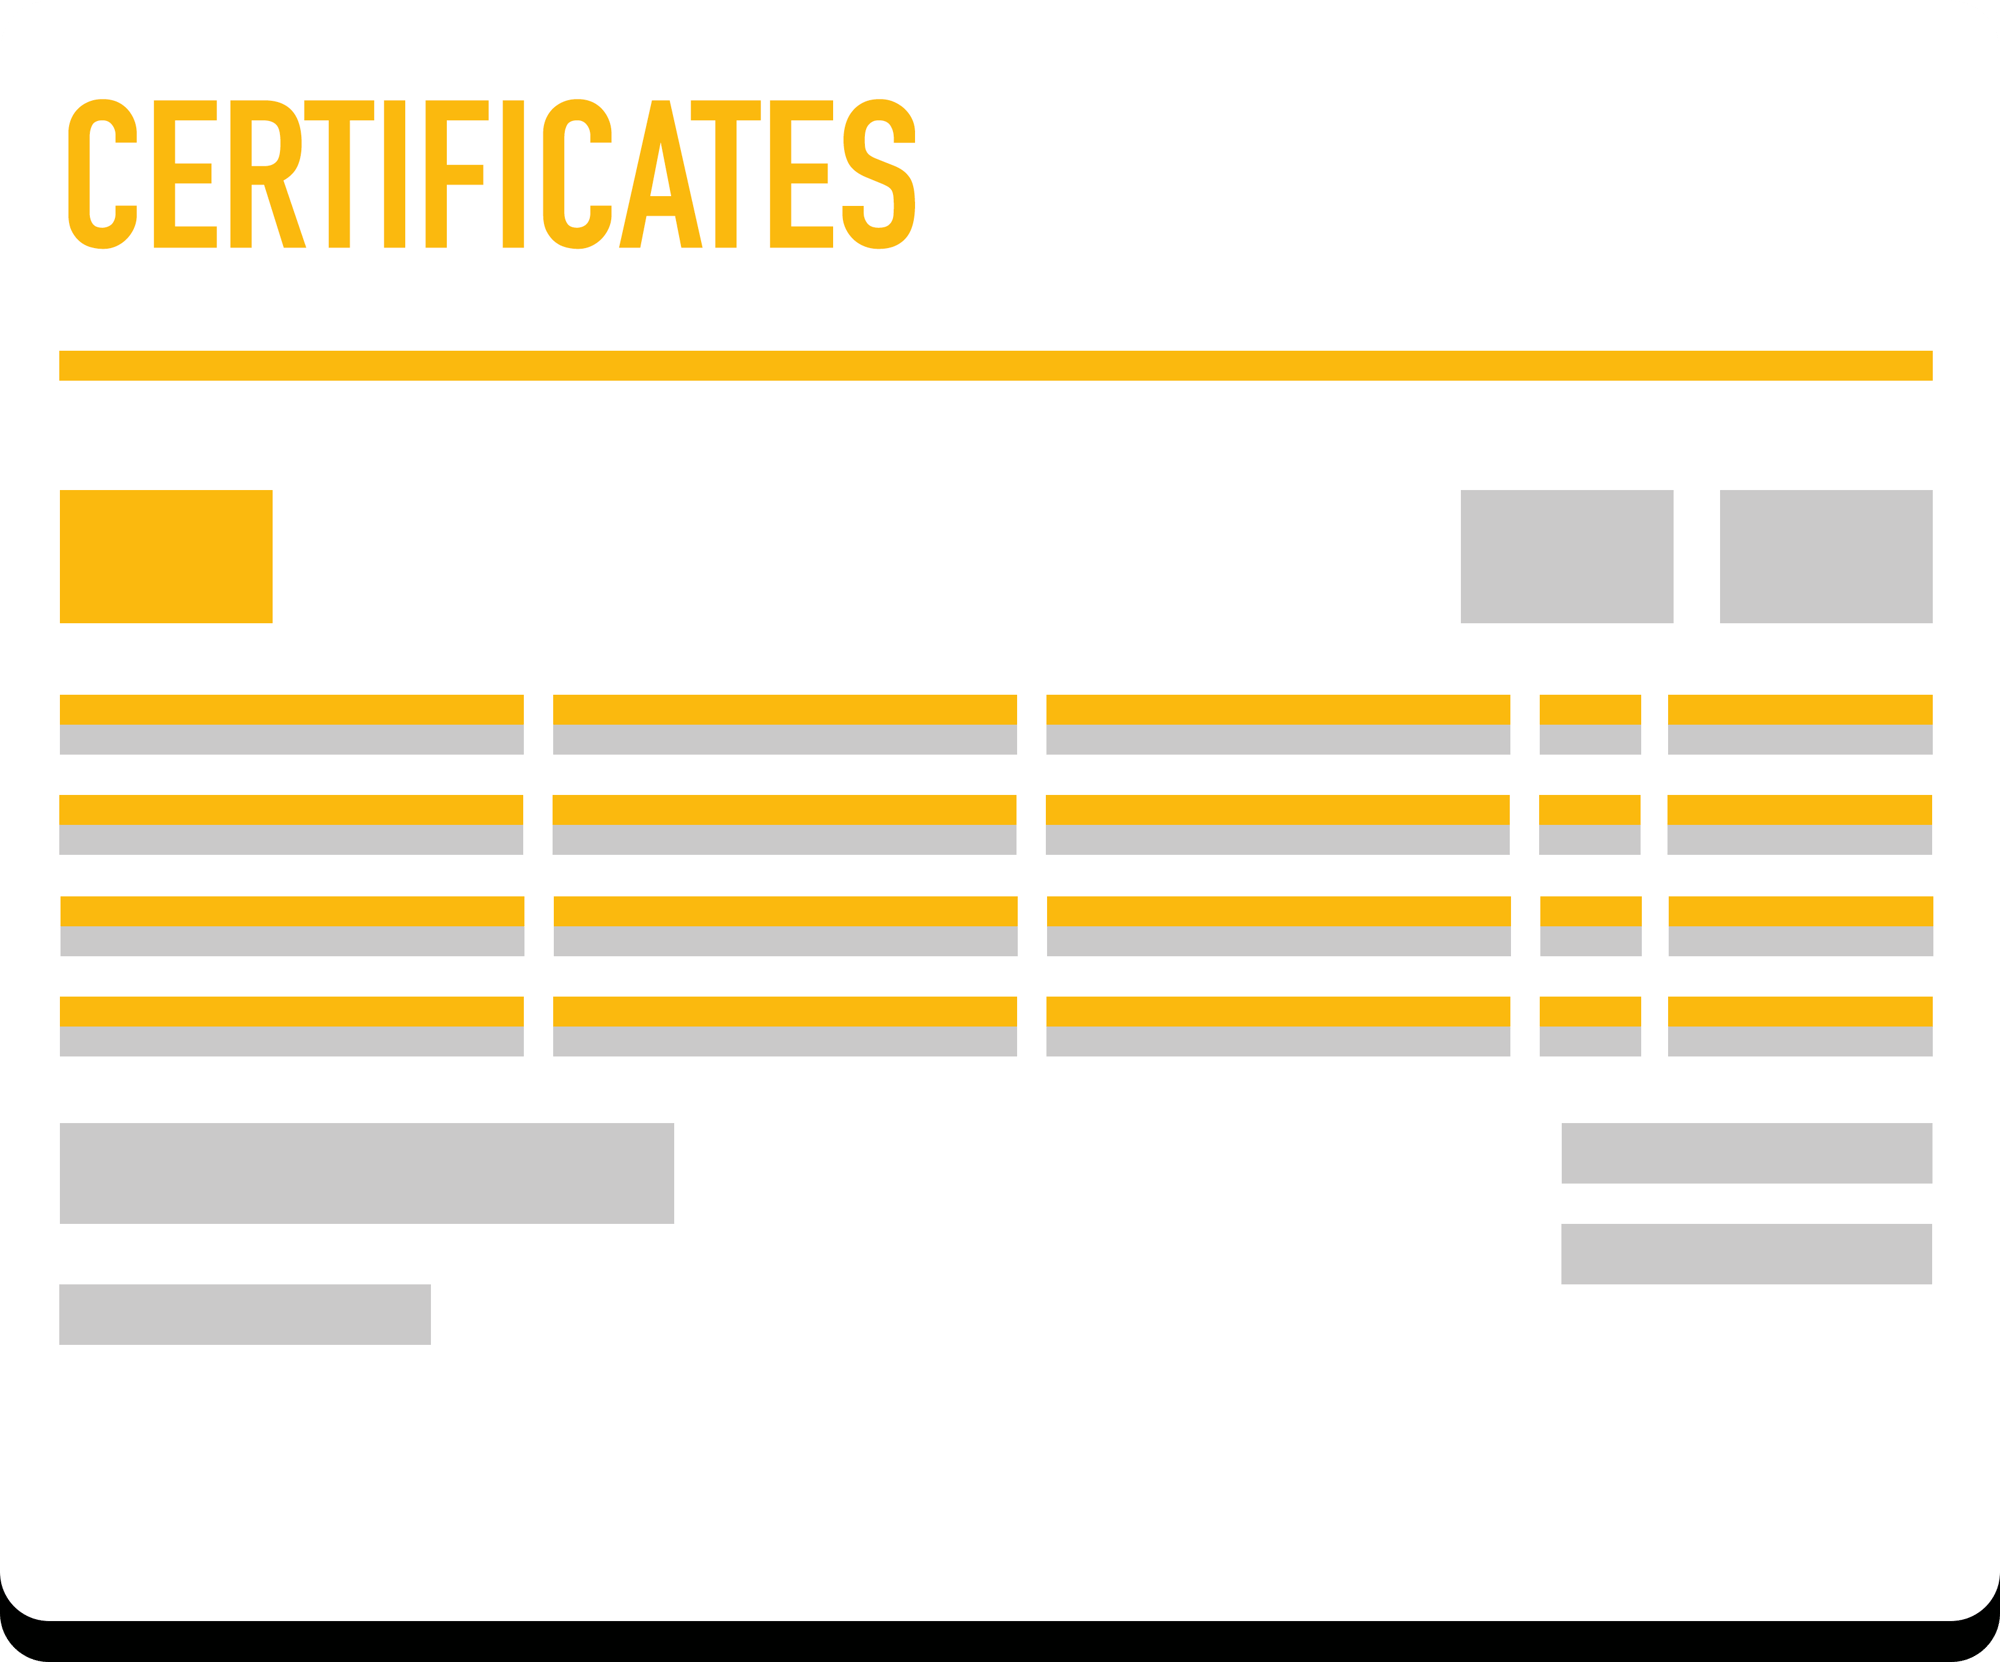 Certificates software for appliance repair company